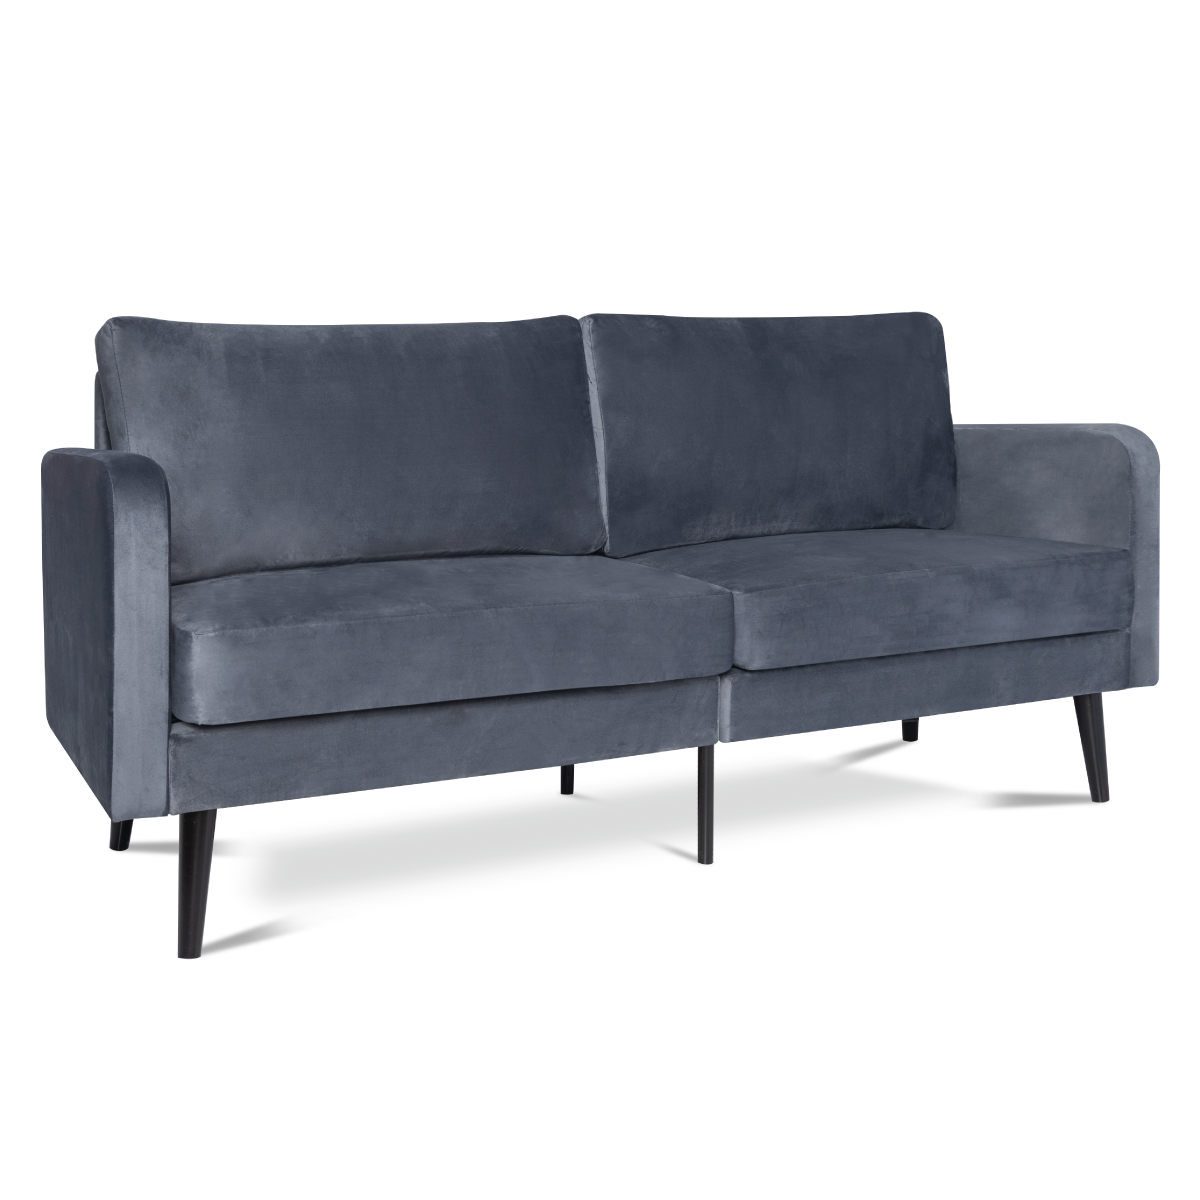 Milliard Couch in a Box - Velour Gray